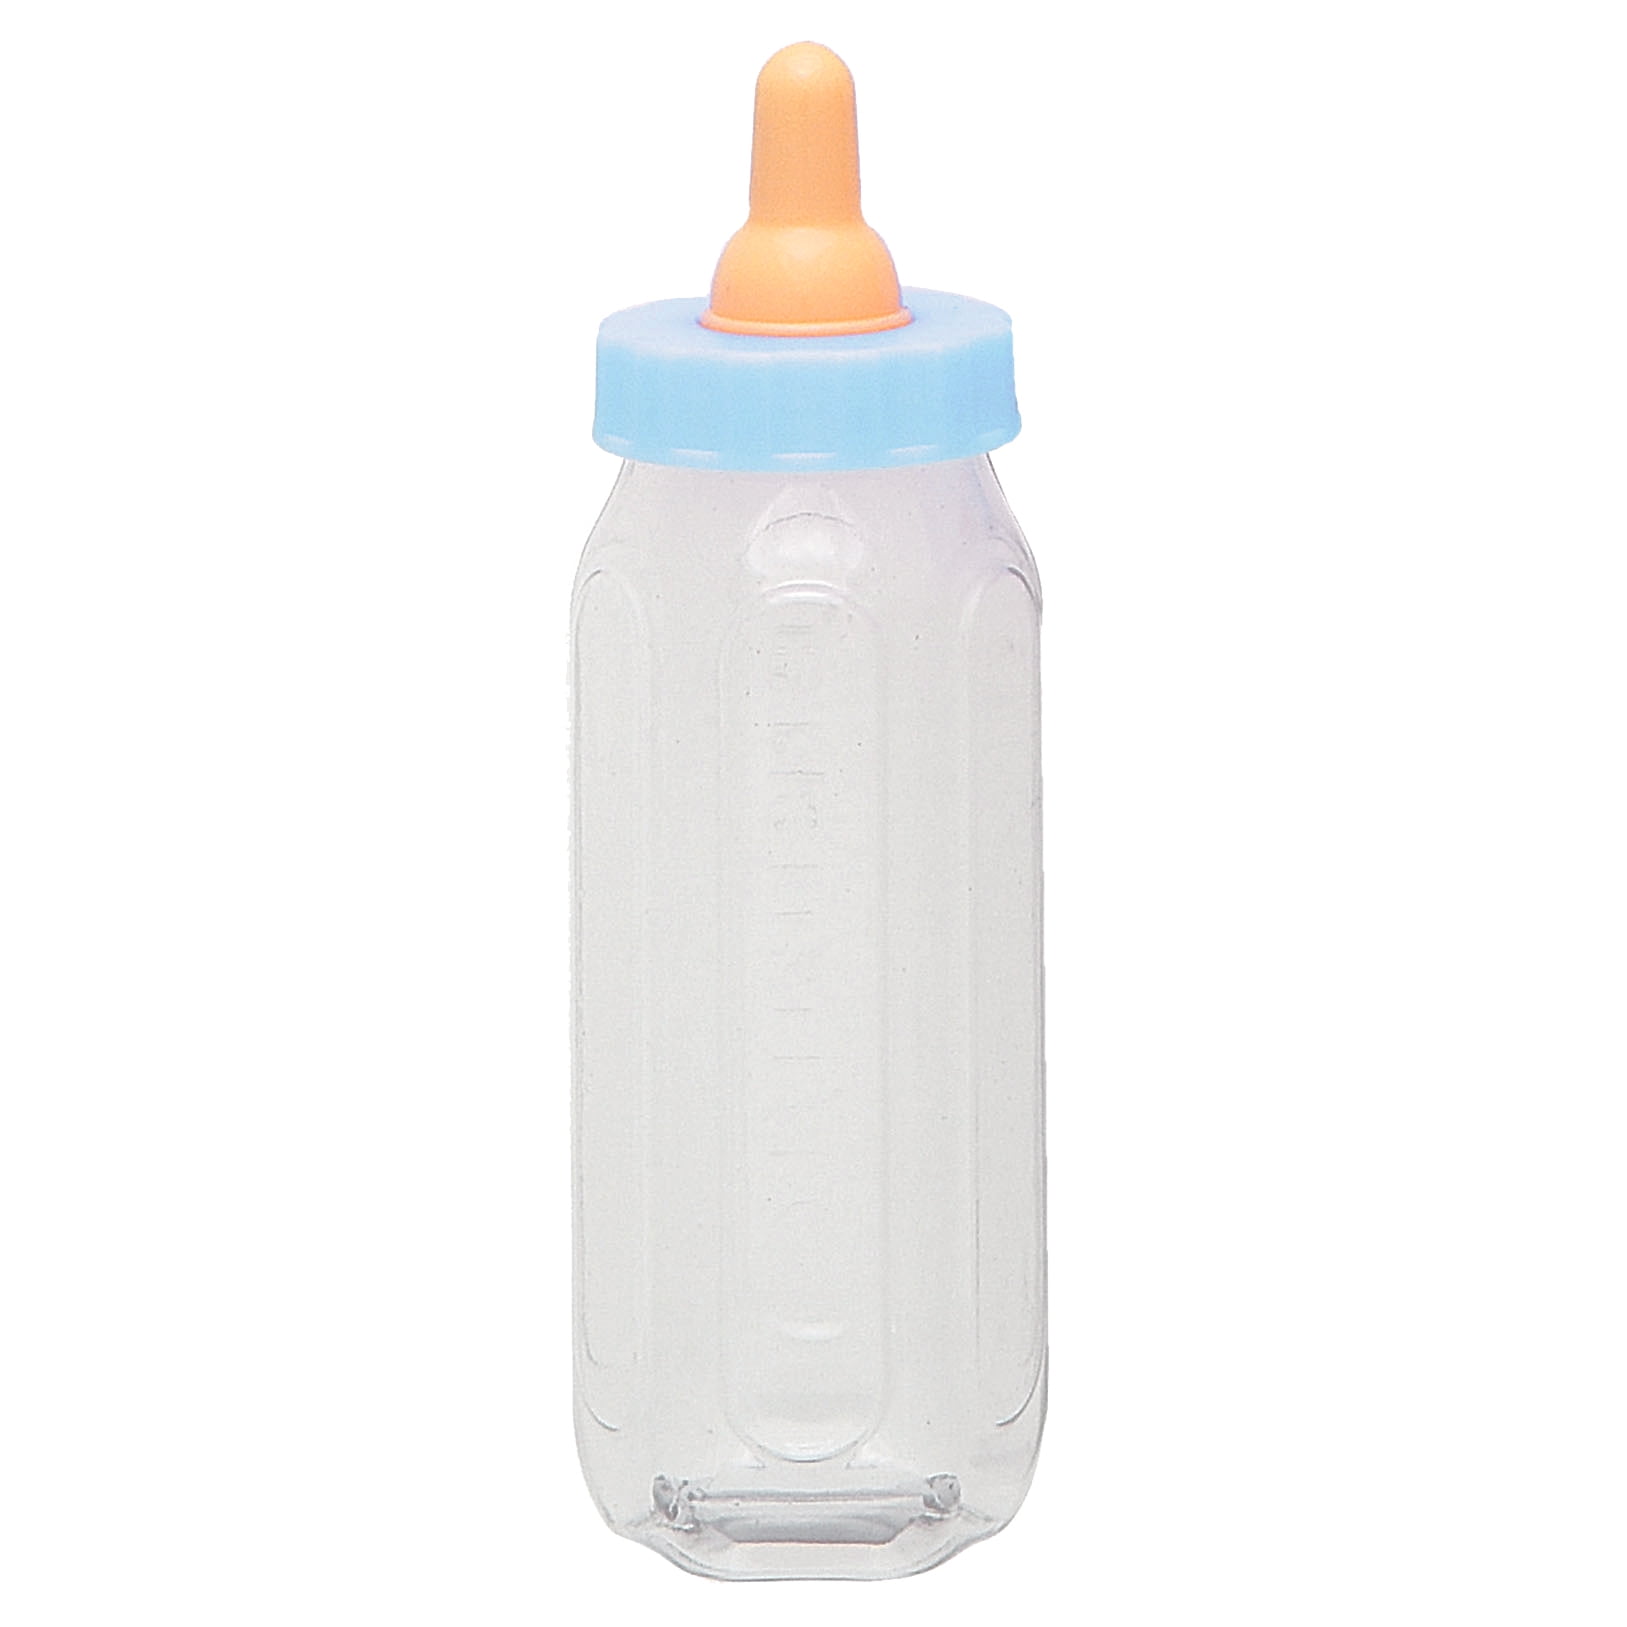 20 Plastic Baby Shower Party Favors/Mini Baby Bottles/Feeding Bottle/20 Pieces 